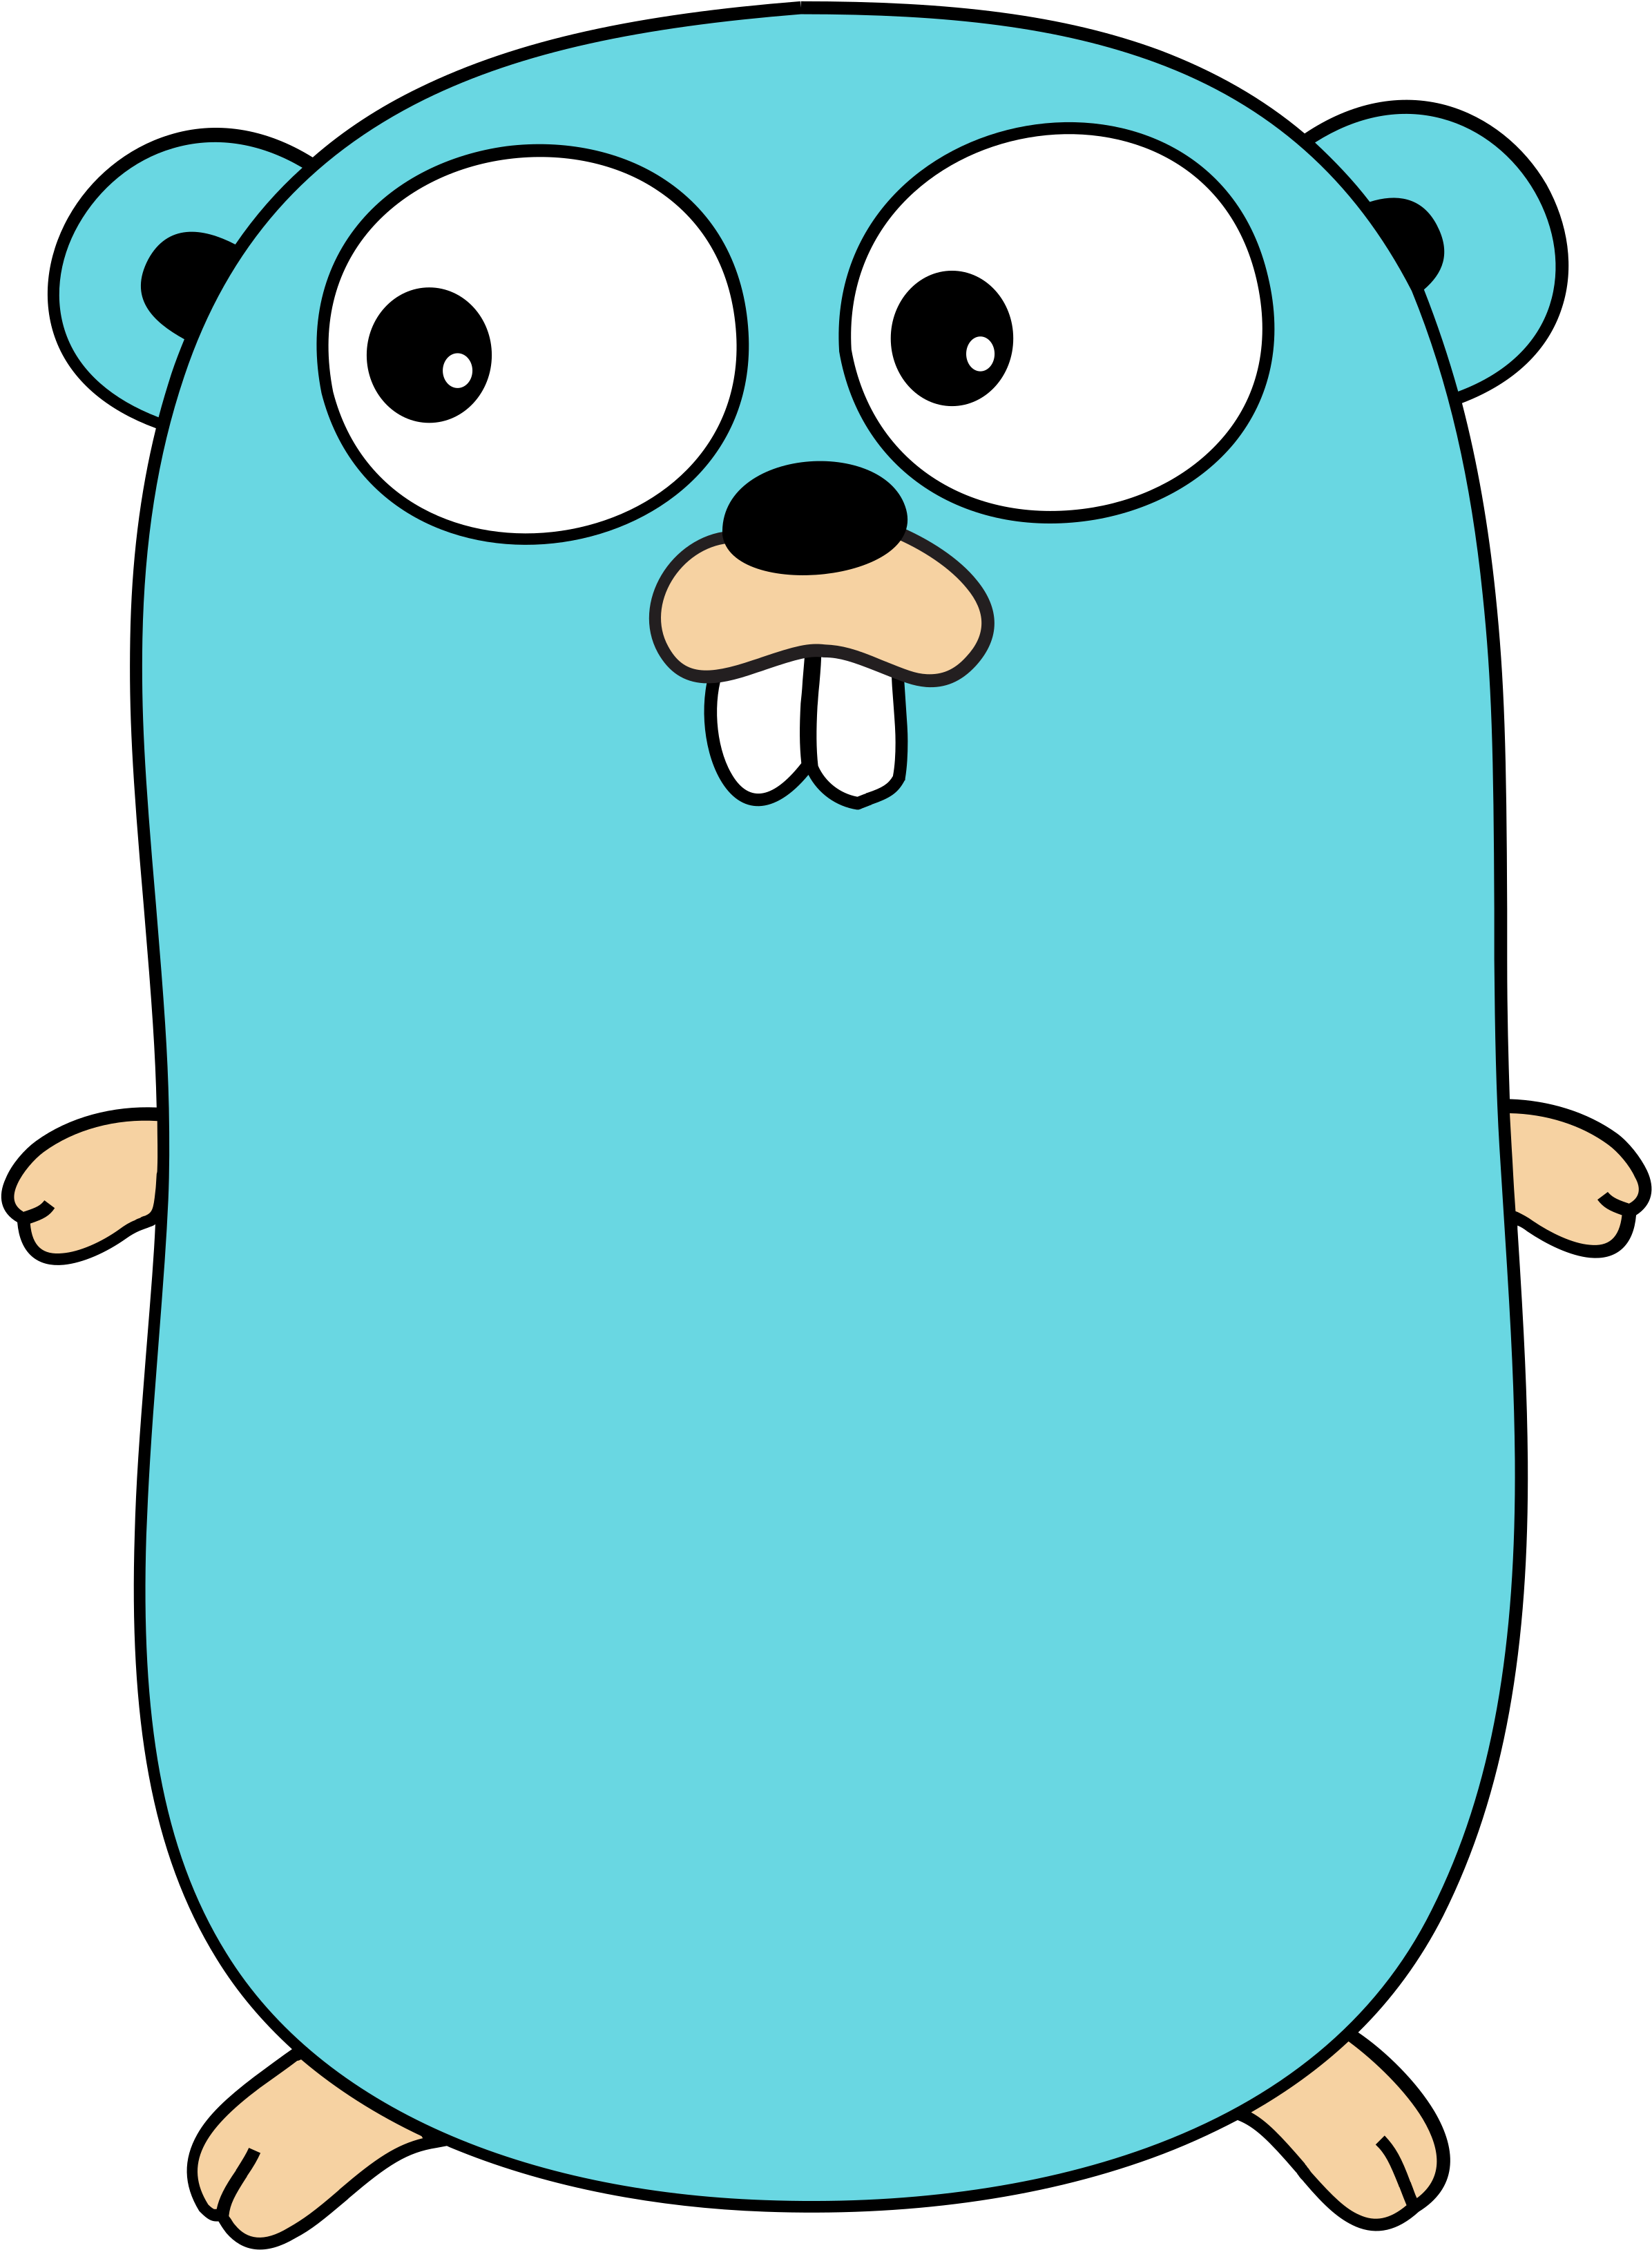 GoLang Mascot (5 Easy Programing Languages To Learn)